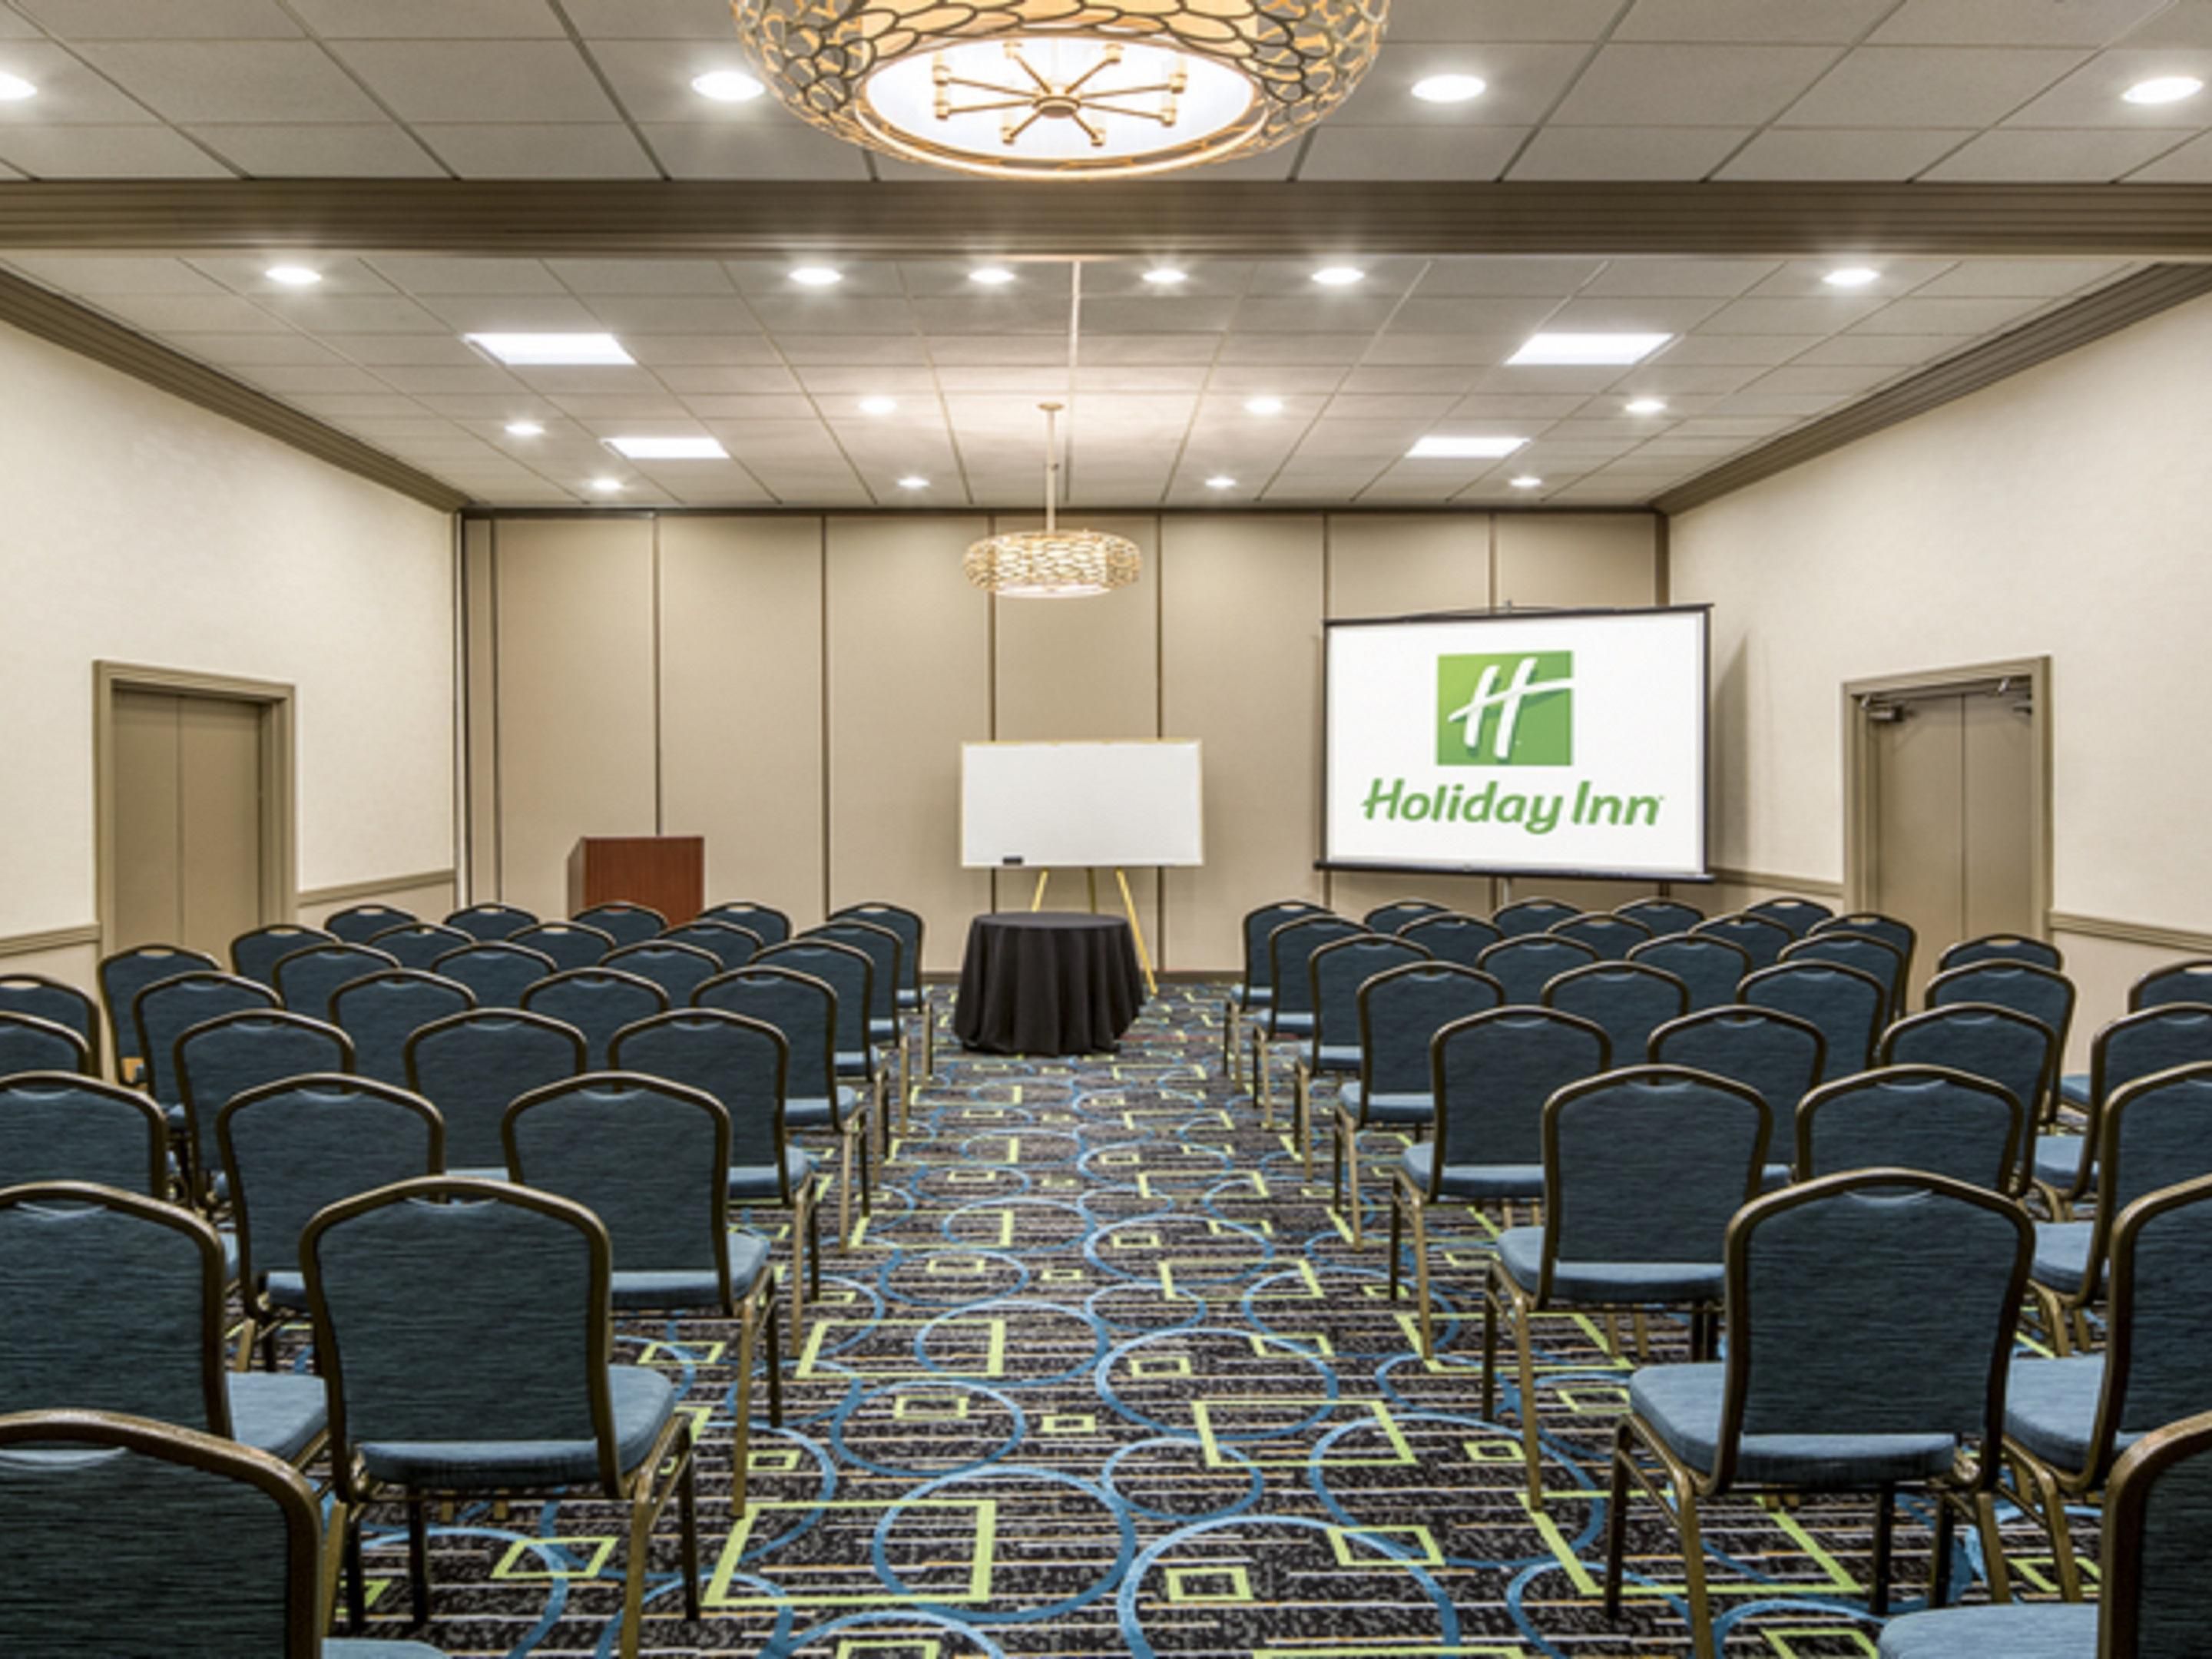 Host your next gathering in our flexible event venue in West Palm Beach, FL. Holiday Inn® Palm Beach-Airport Conf Ctr offers plenty of space, with over 7,000 square feet of total area and seven meeting rooms. Our largest room offers 2,288 square feet of versatile space. Let our team assist you with top-notch planning services and catering.